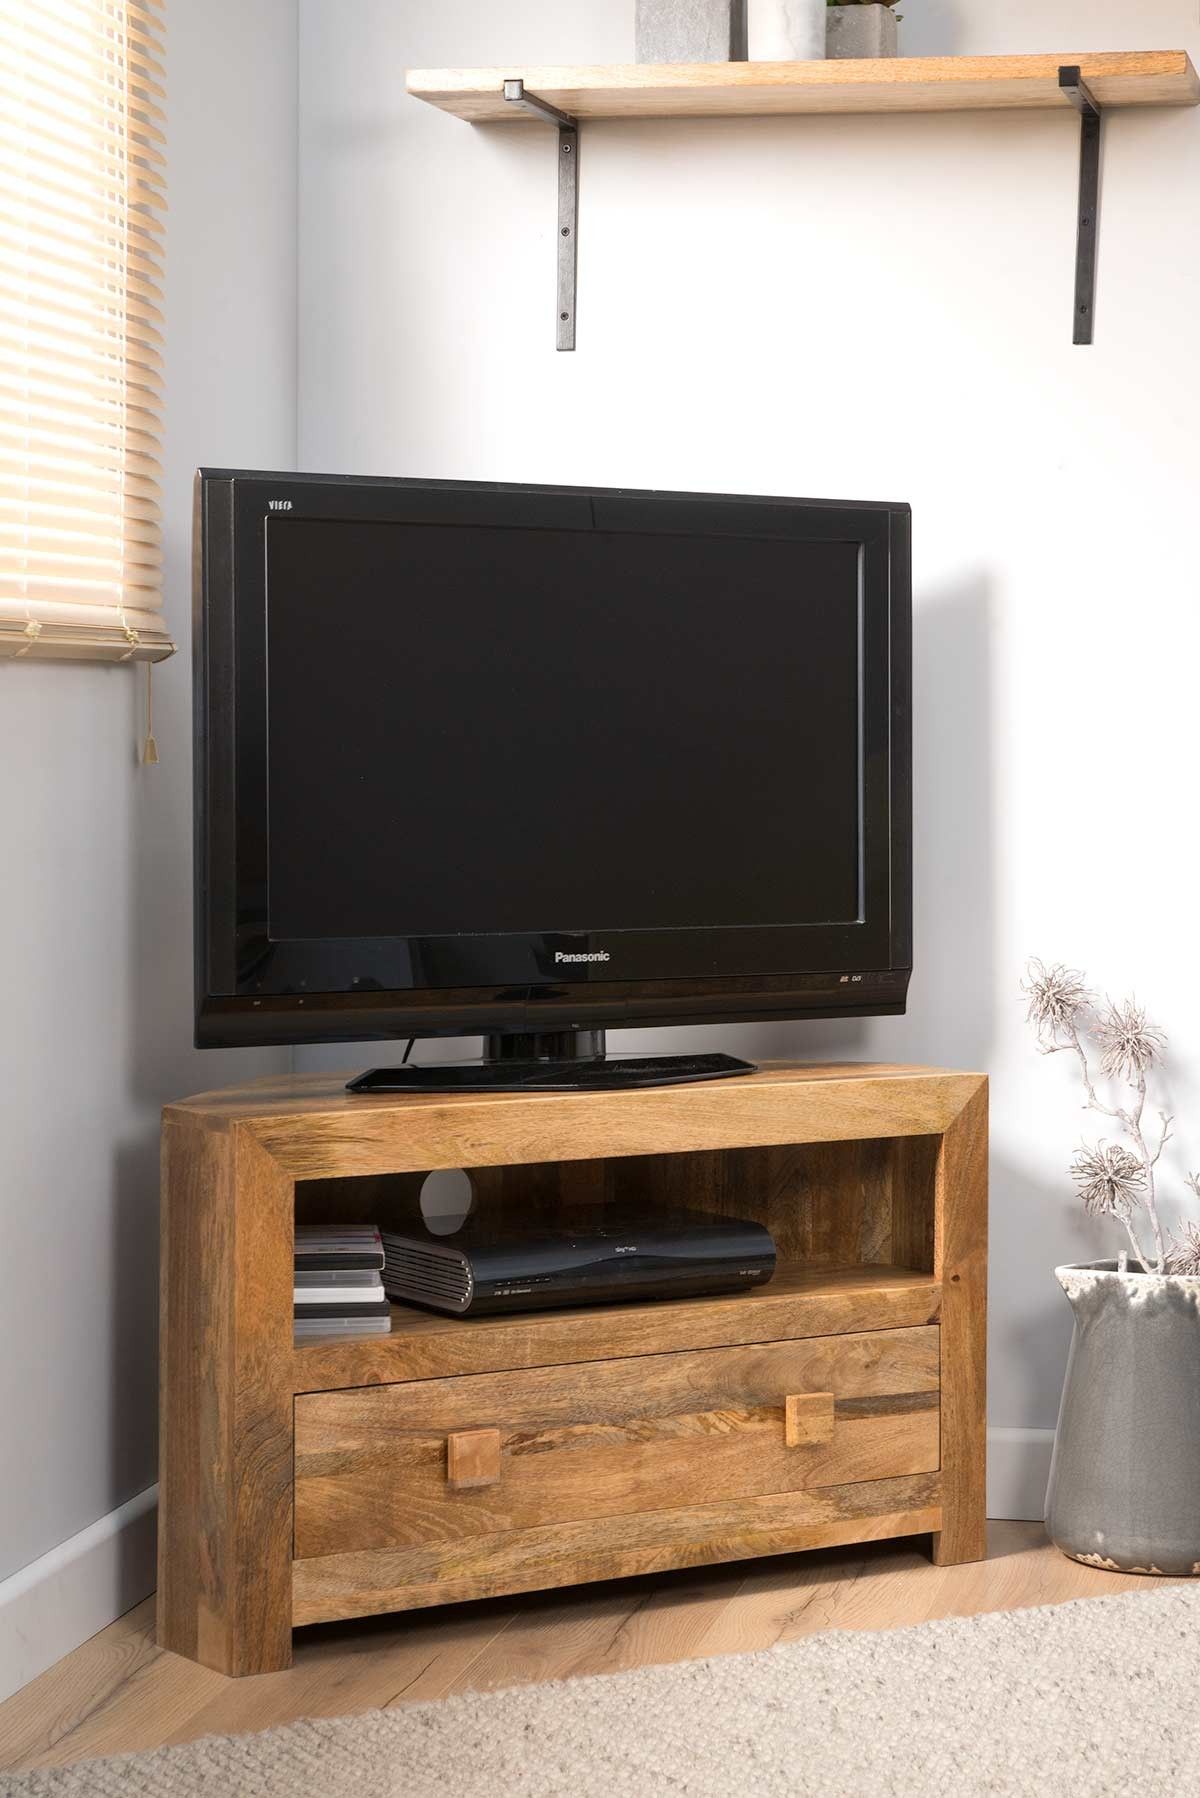 Dakota Light Mango Small Corner Tv Stand Within Small Tv Stands For Top Of Dresser (View 9 of 15)